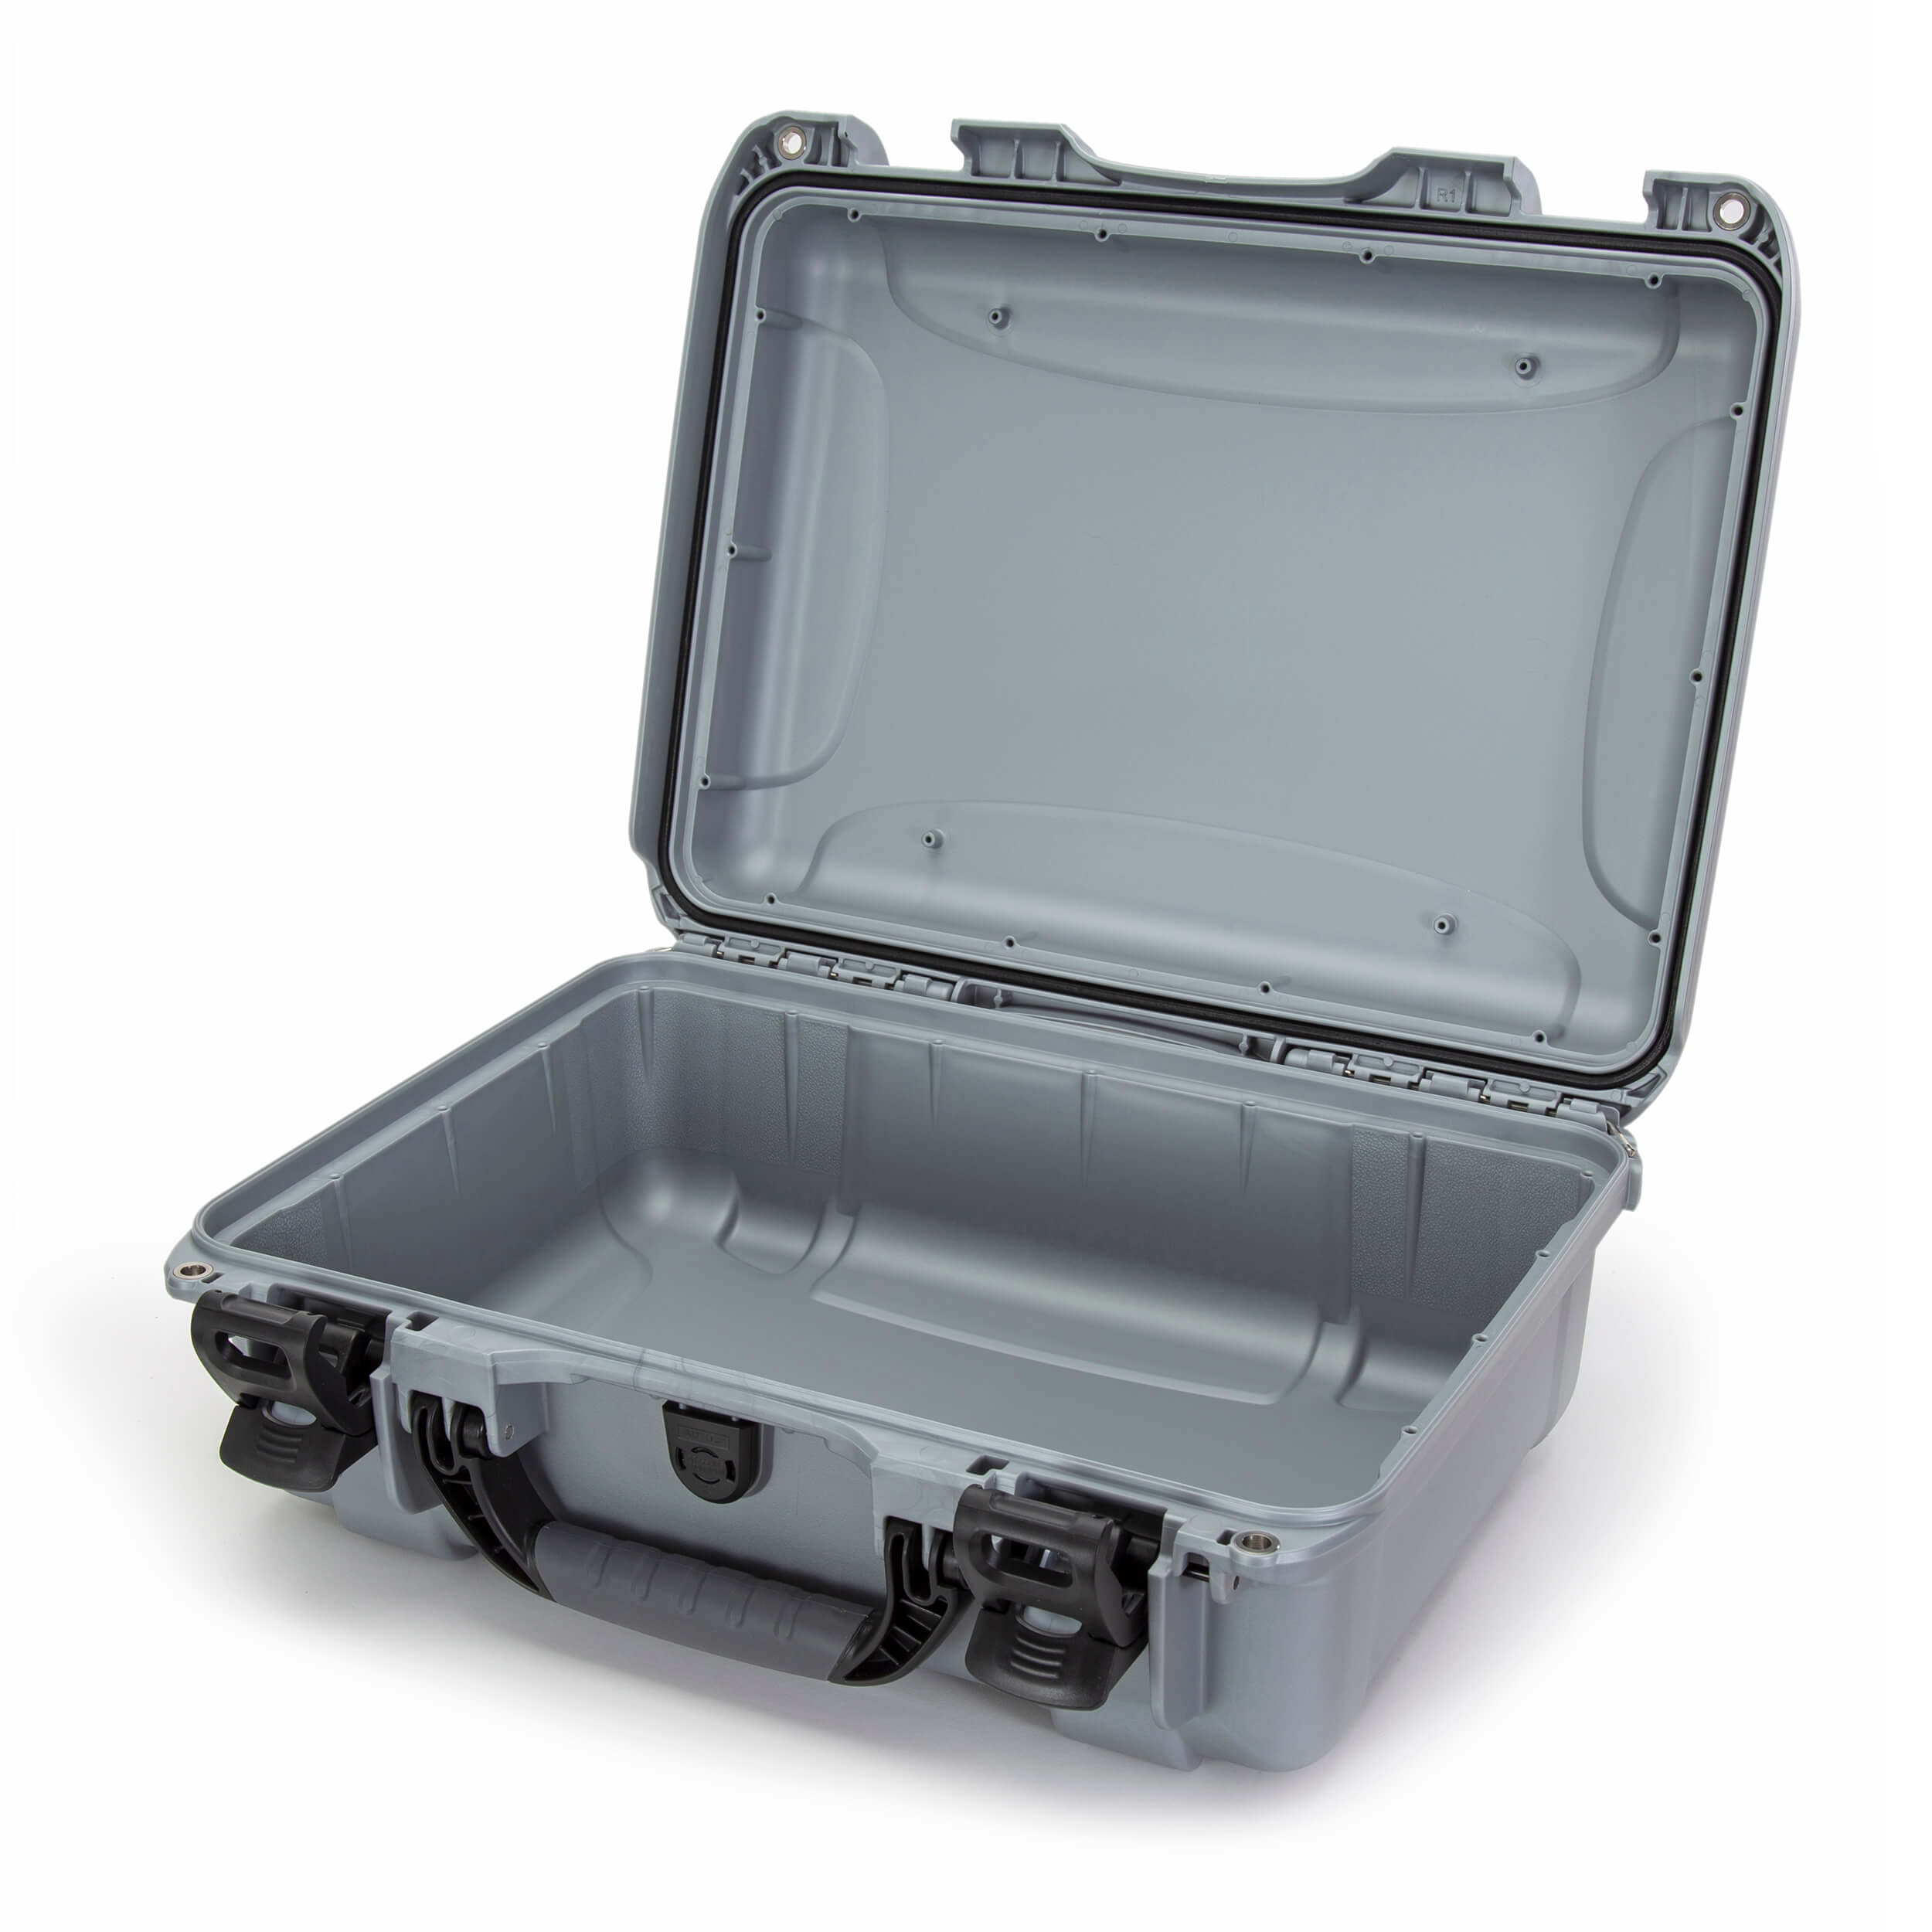 Nanuk R 925 Eco-Friendly Hard Case (Black, 21L, Foam Insert) with Made from Waterproof, Impact & Measures 18.7 x 14.8